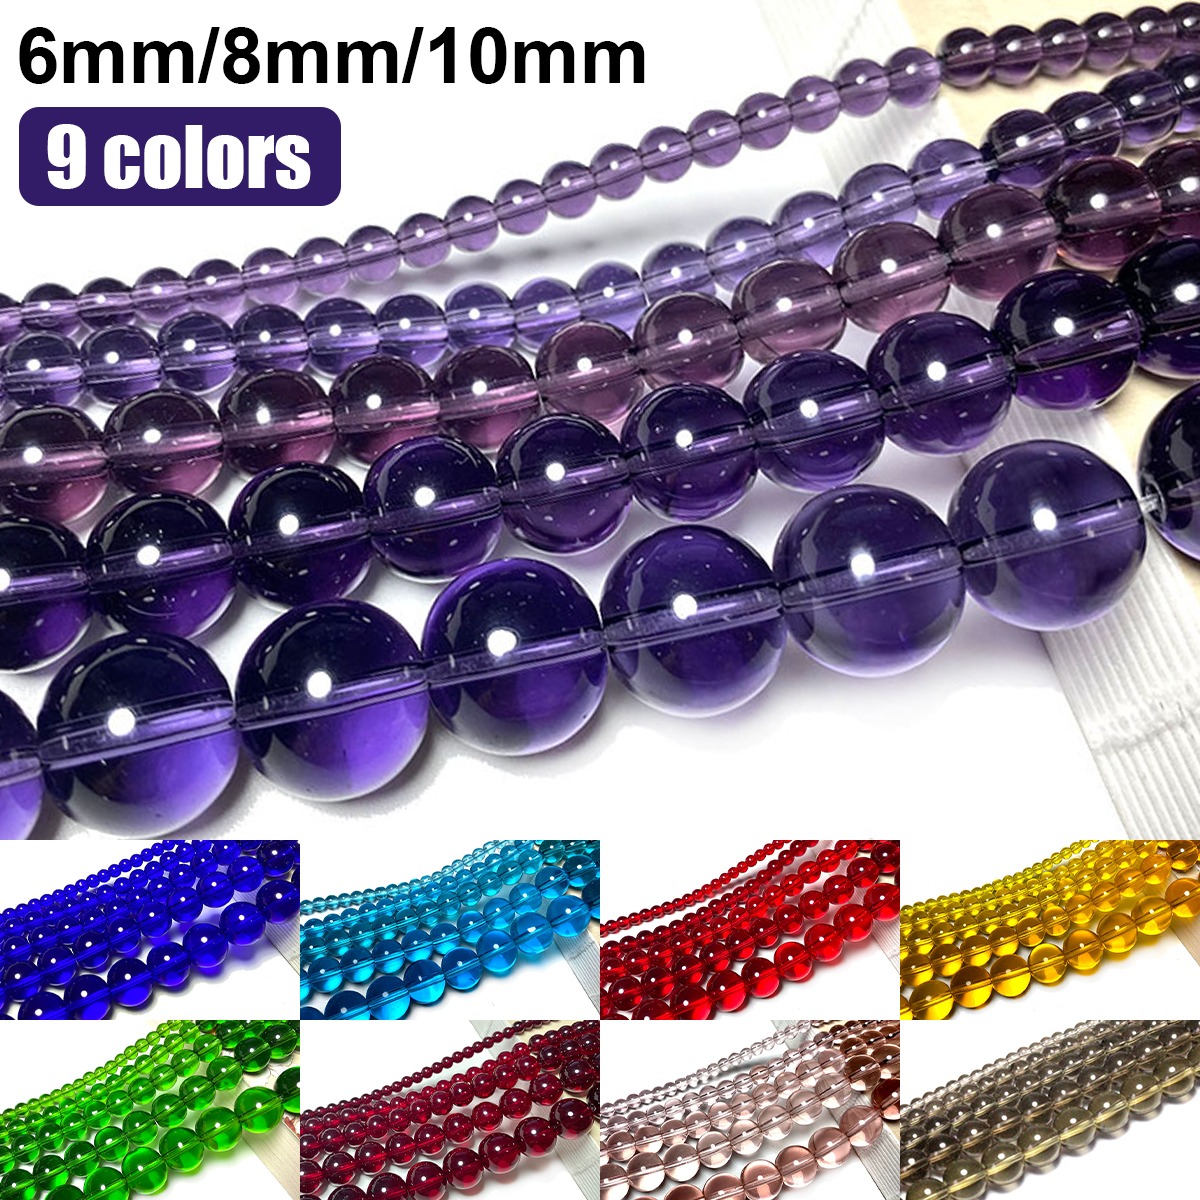 Natural Round Stone Beads Genuine Real Gemstones Smooth Beads with 800pcs  6mm 15 Kinds for Jewelry Making Bracelet Earrings Necklace DIY Crafting Art